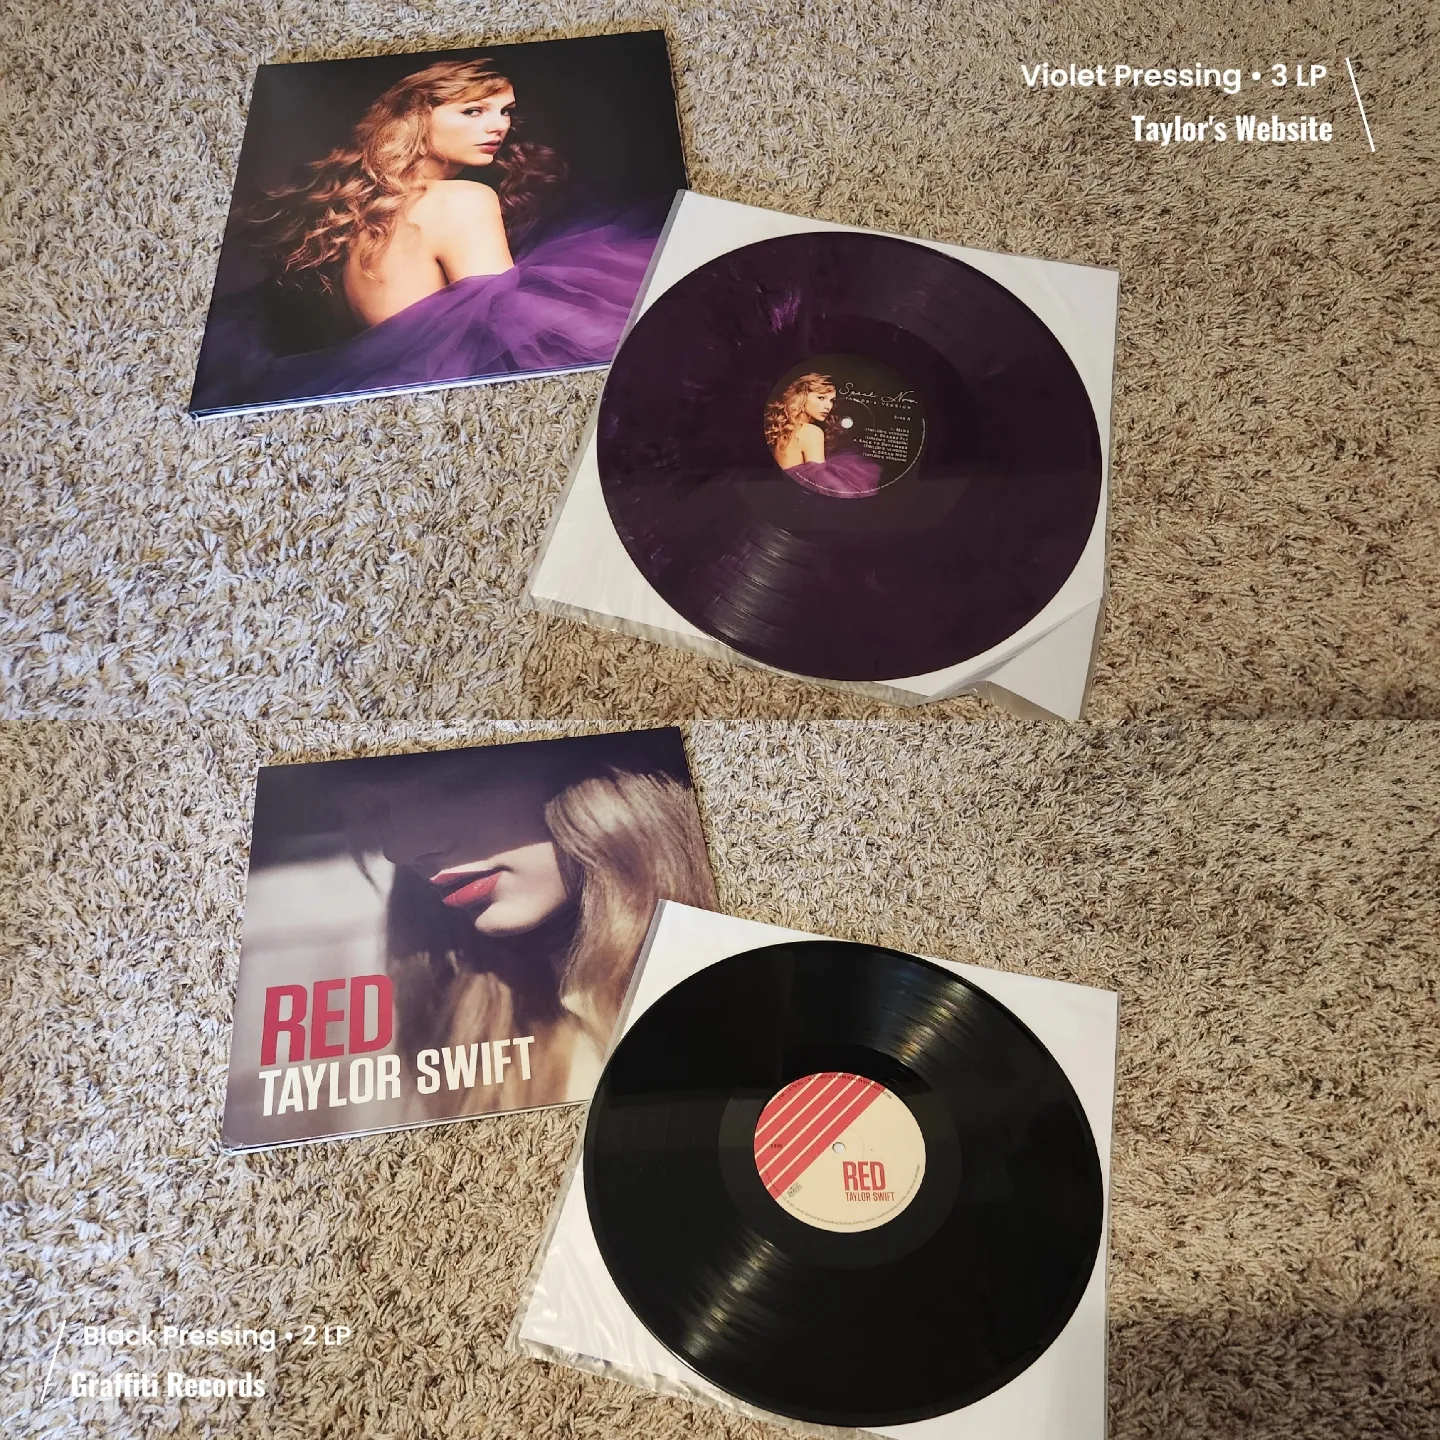  Taylor Swift RARE Limited Edition Red Vinyl 2 LP